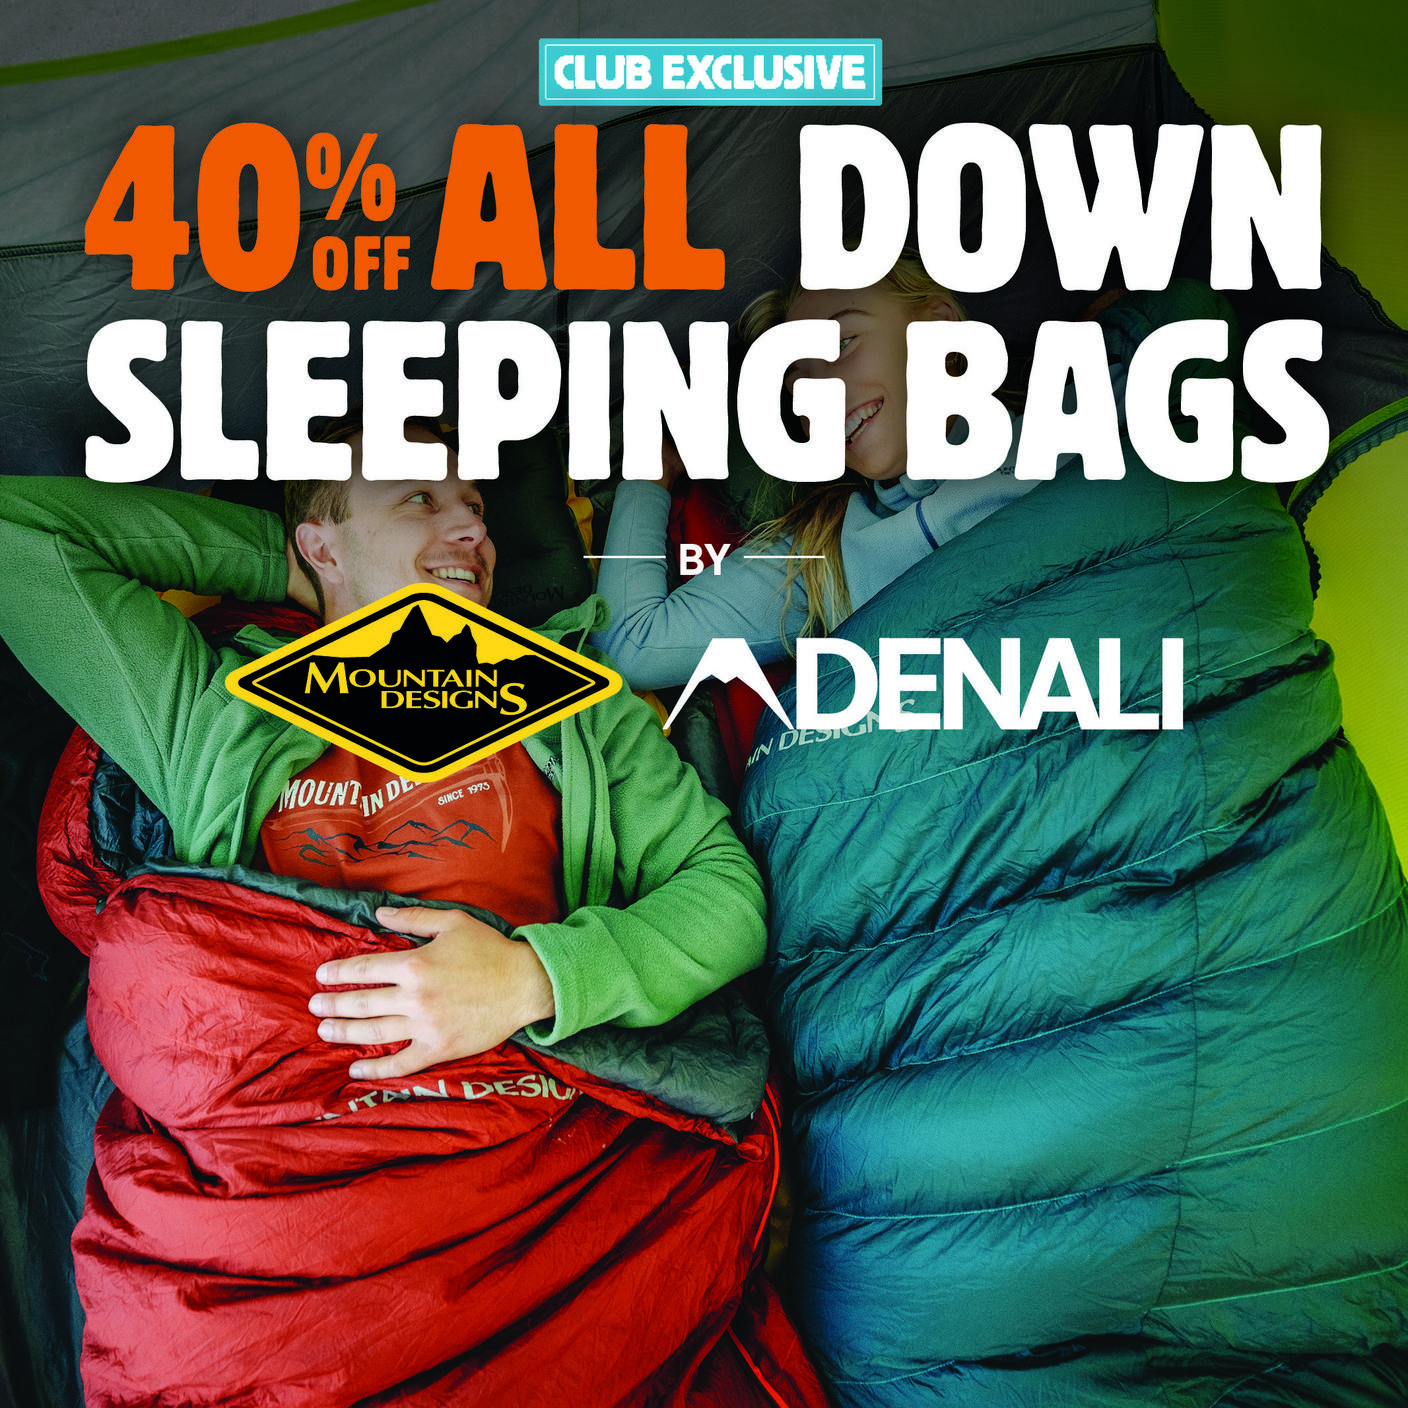 40% OFF ALL Down Sleeping Bags by Mountain Designs and Denali  offers in Anaconda